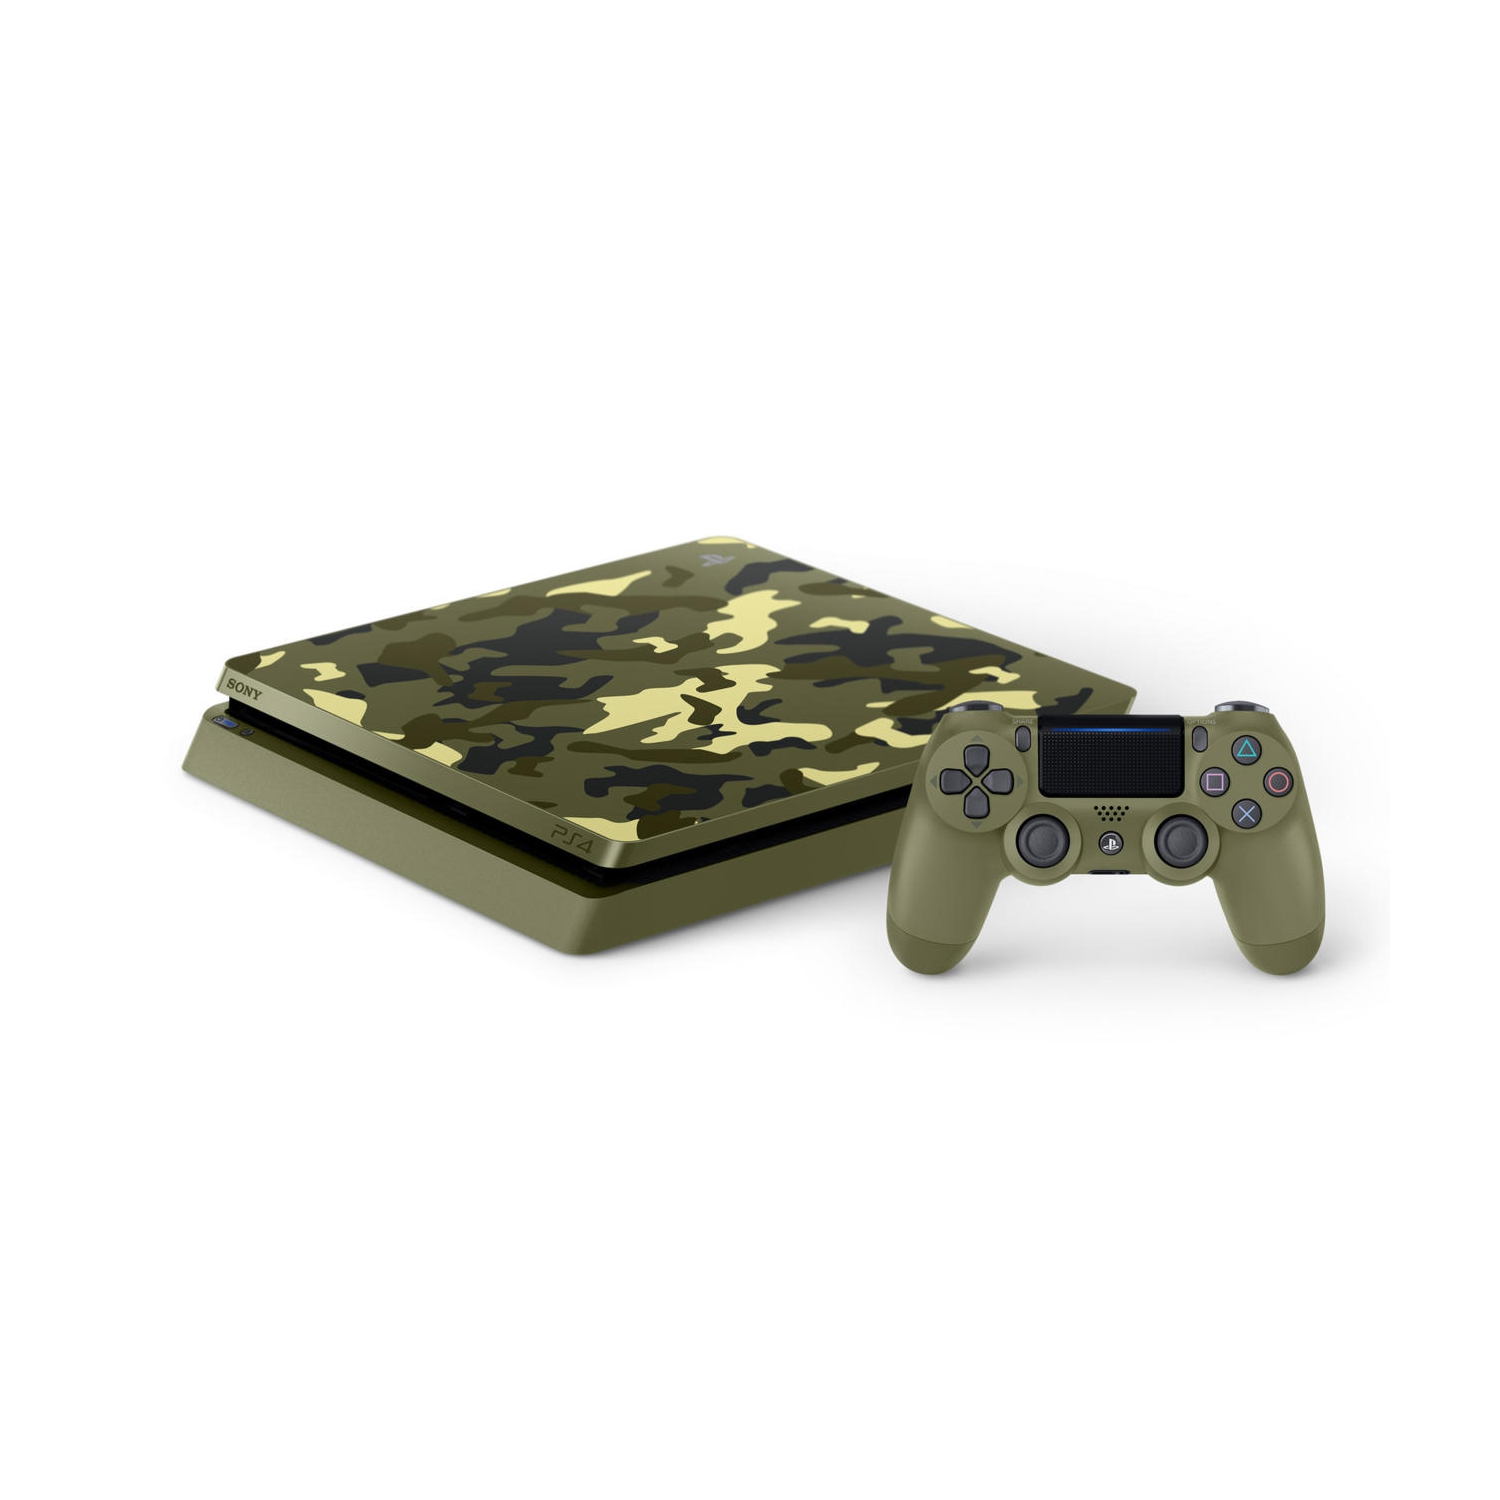 Refurbished (Good) - Sony PlayStation 4 PS4 Slim 1TB Console (Green Camouflage)